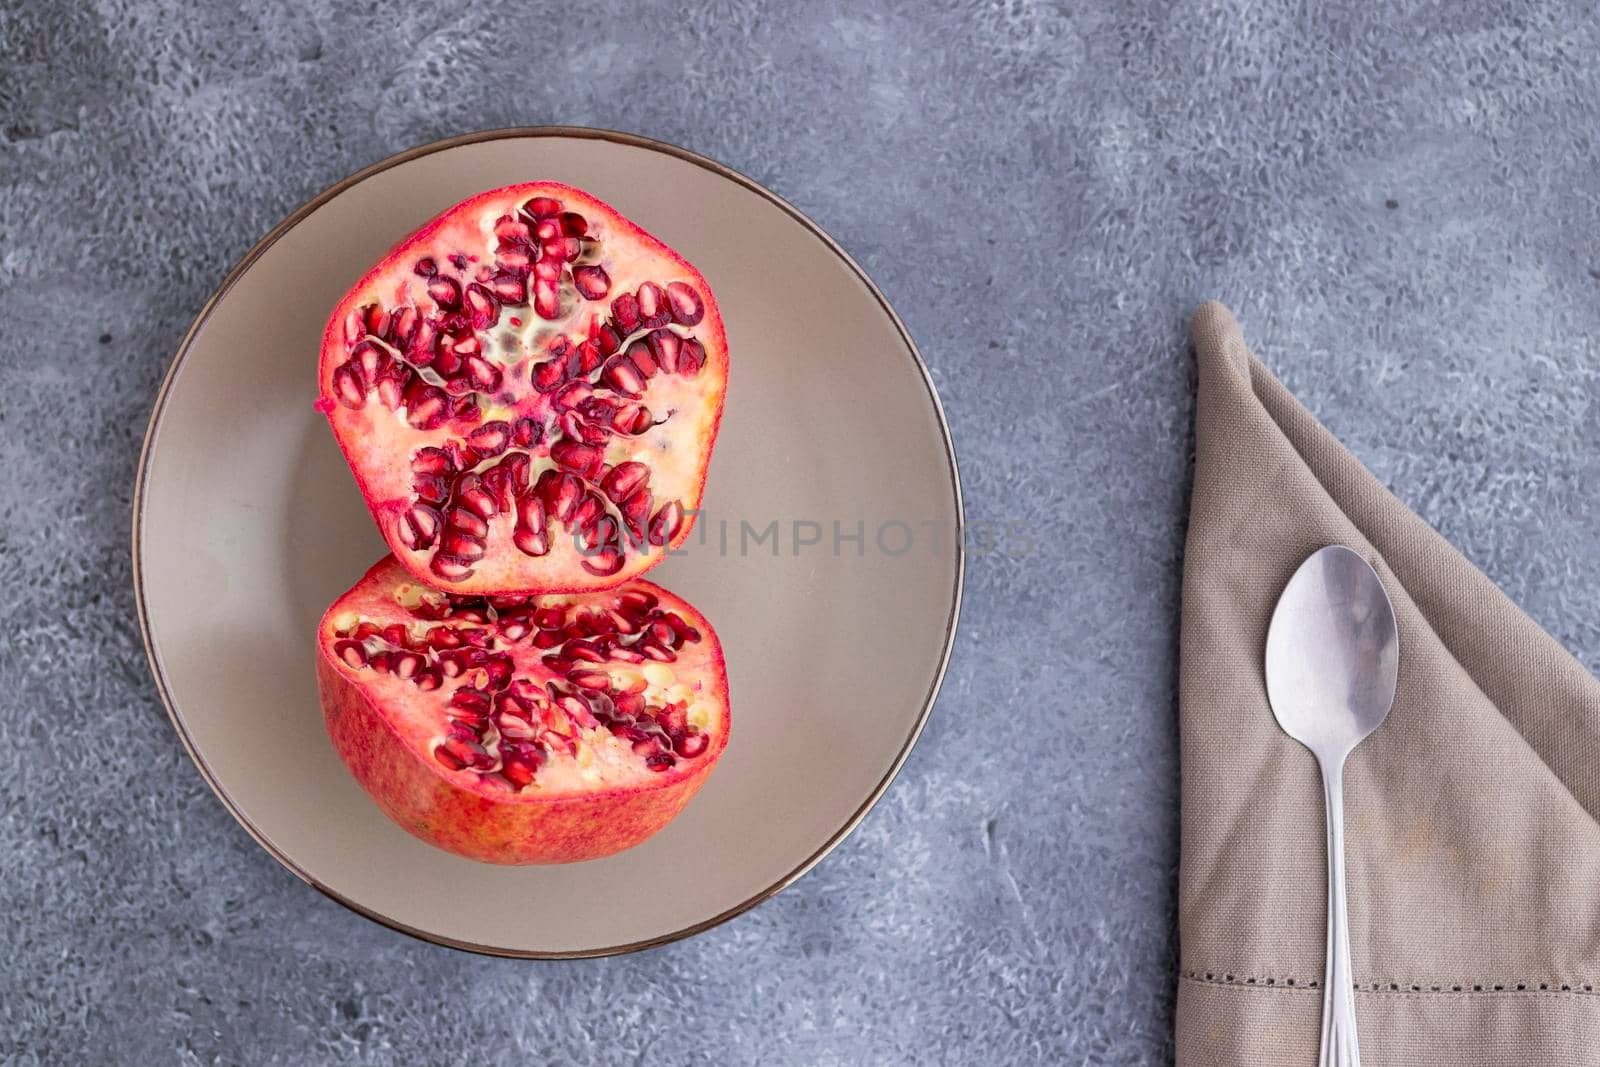 Pomegranate fruit cut in half and served on a plate